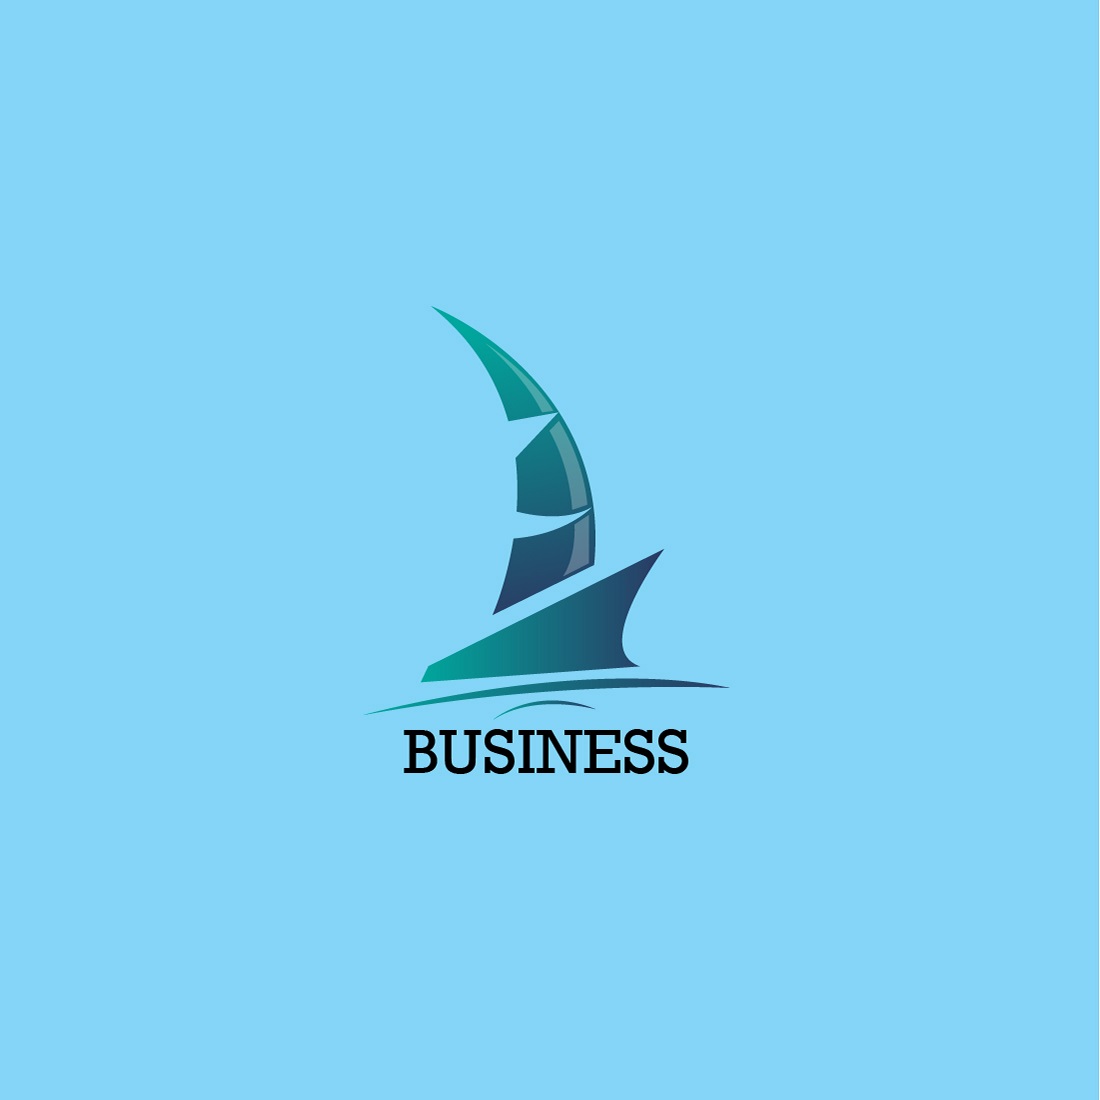 Sailing Yacht Logo For Business cover image.